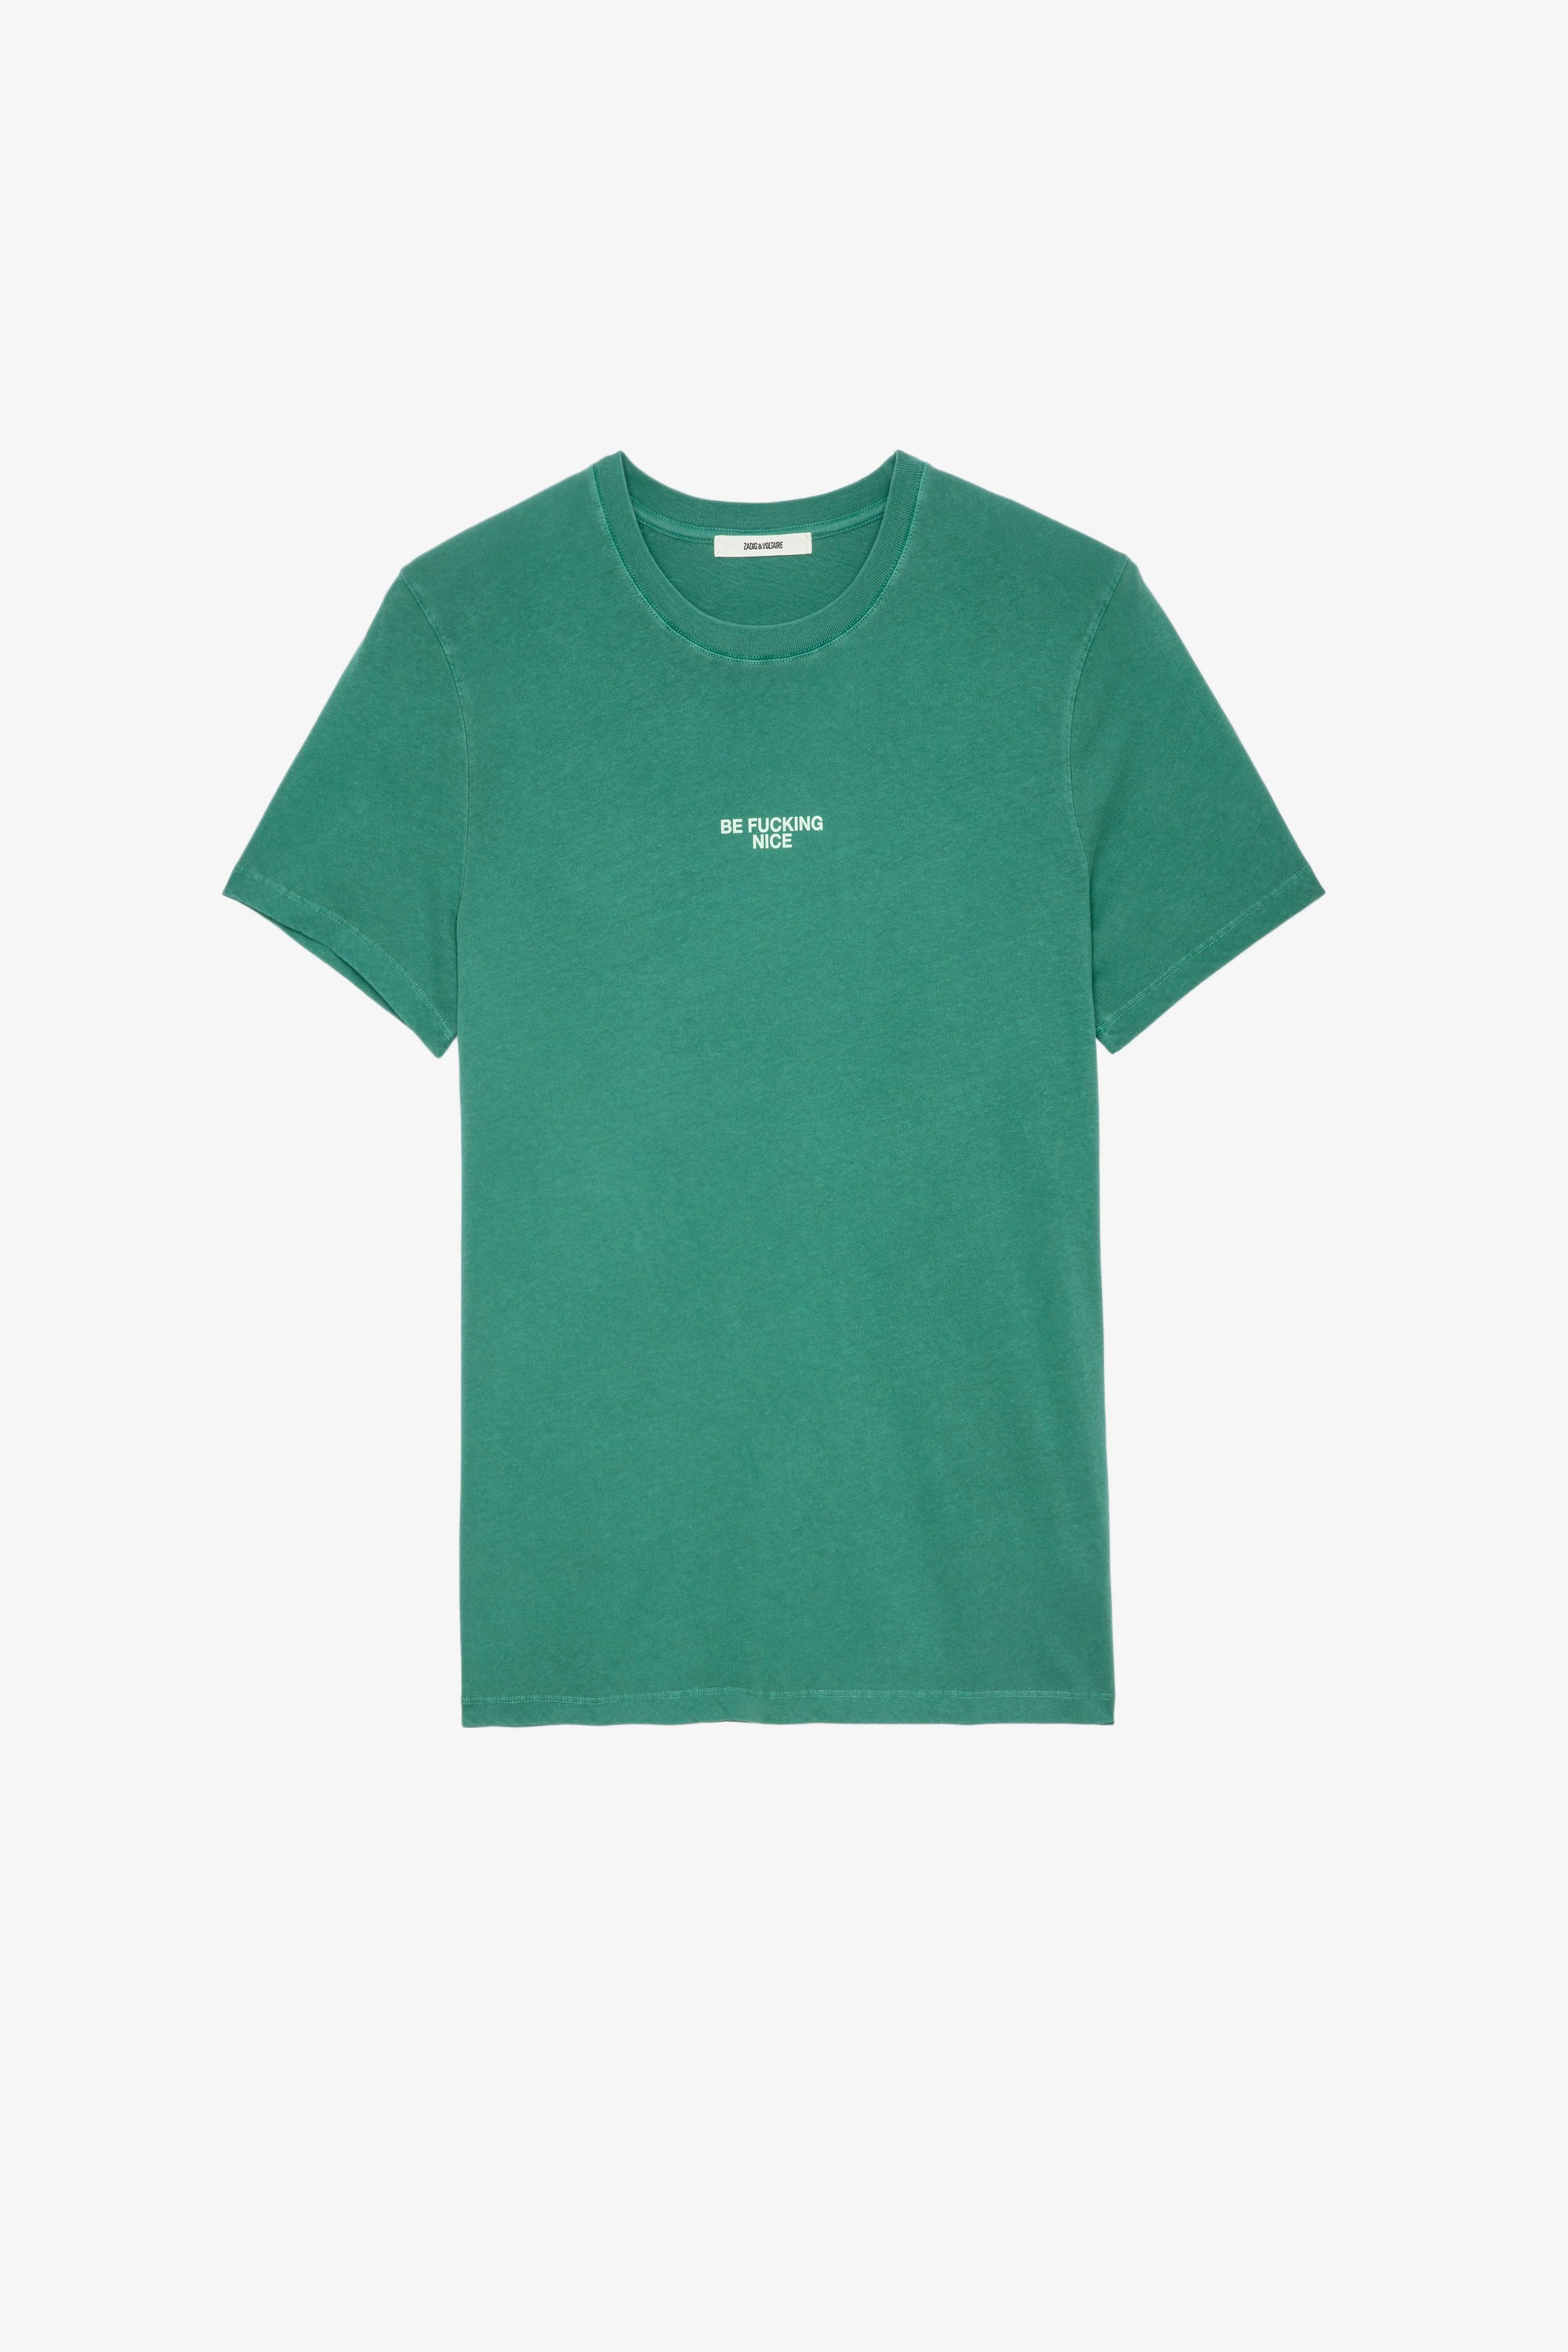 T-shirt Ted T-shirt in cotone verde con scritta "Be fucking nice" - Uomo